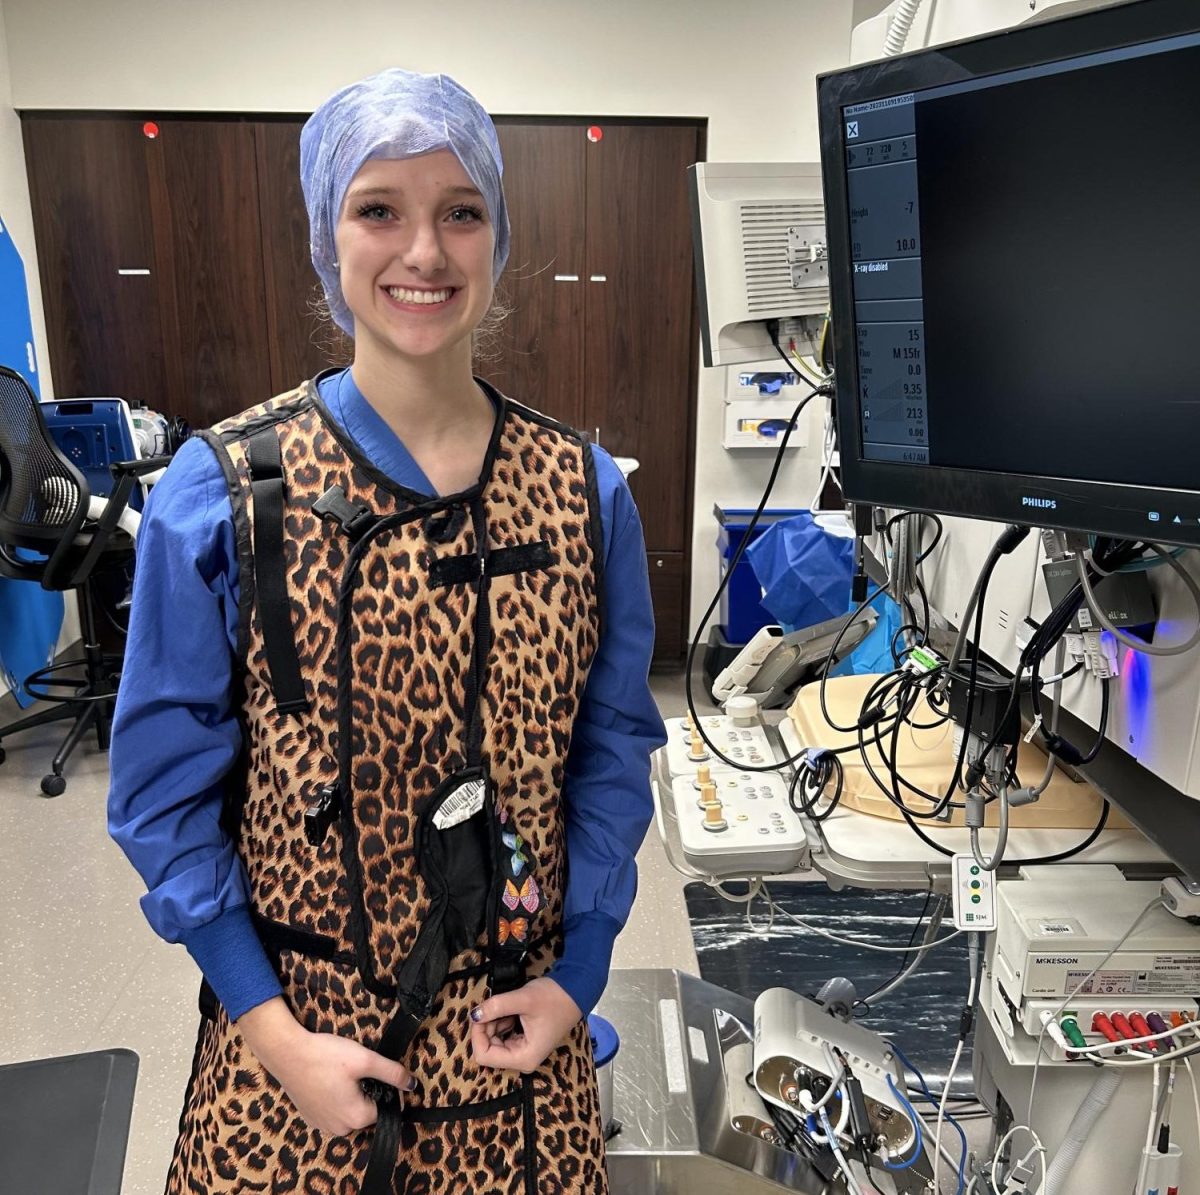 McKenzie Park wears protecting equipment during her job shadow at the cardiac catheterization lab at Asante Medical Center in Medford.